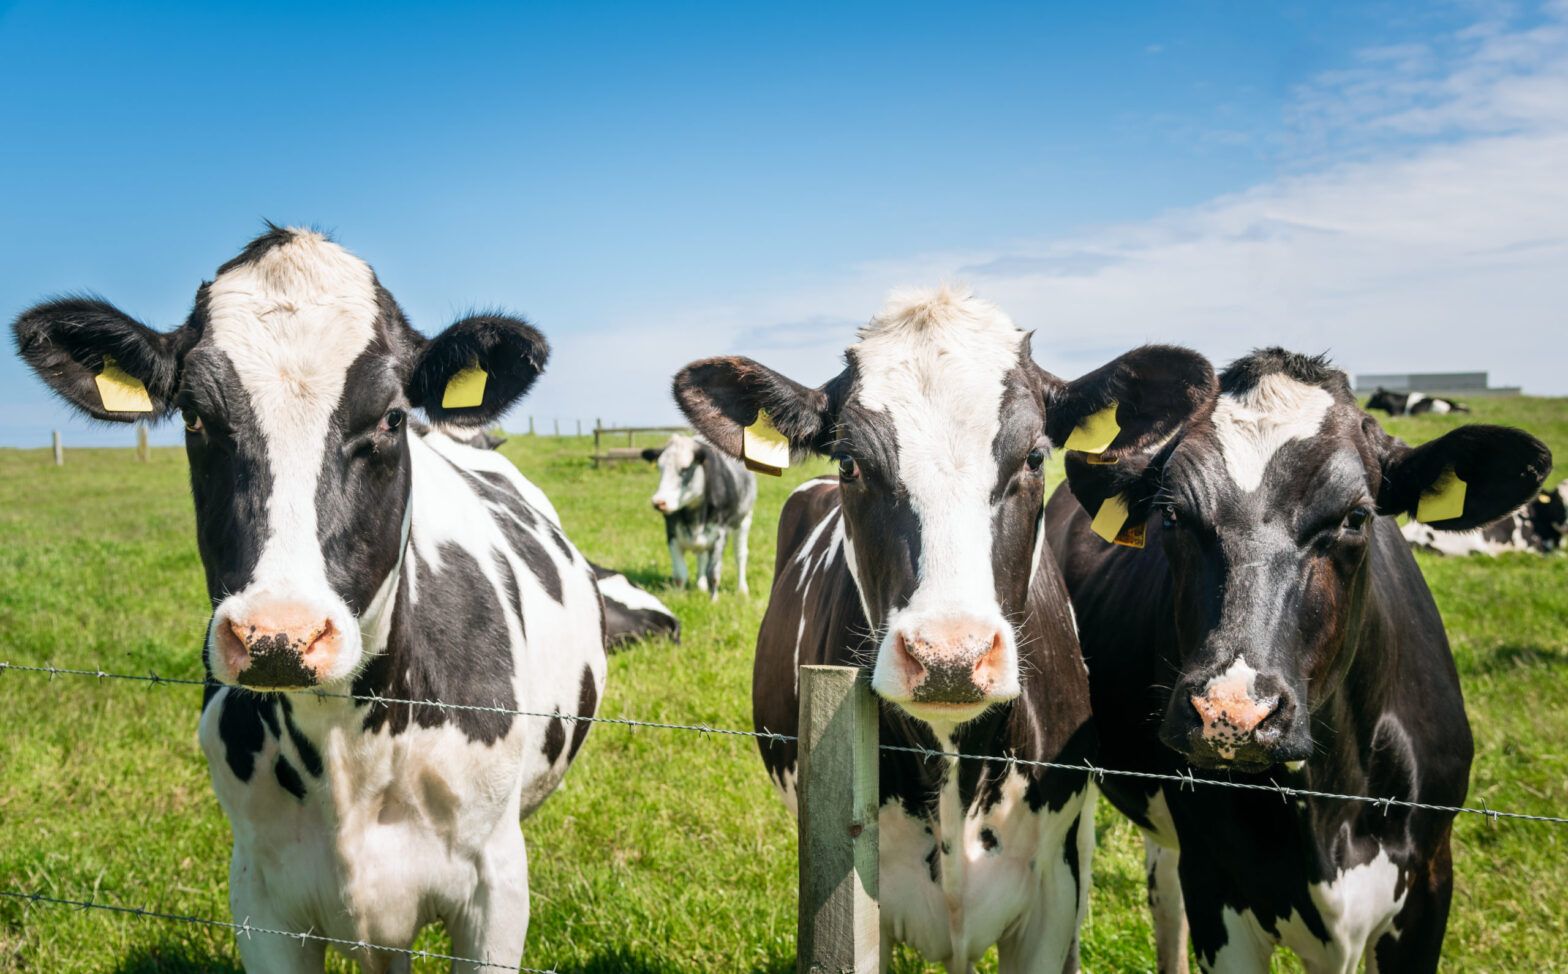 Are cows the new coal?